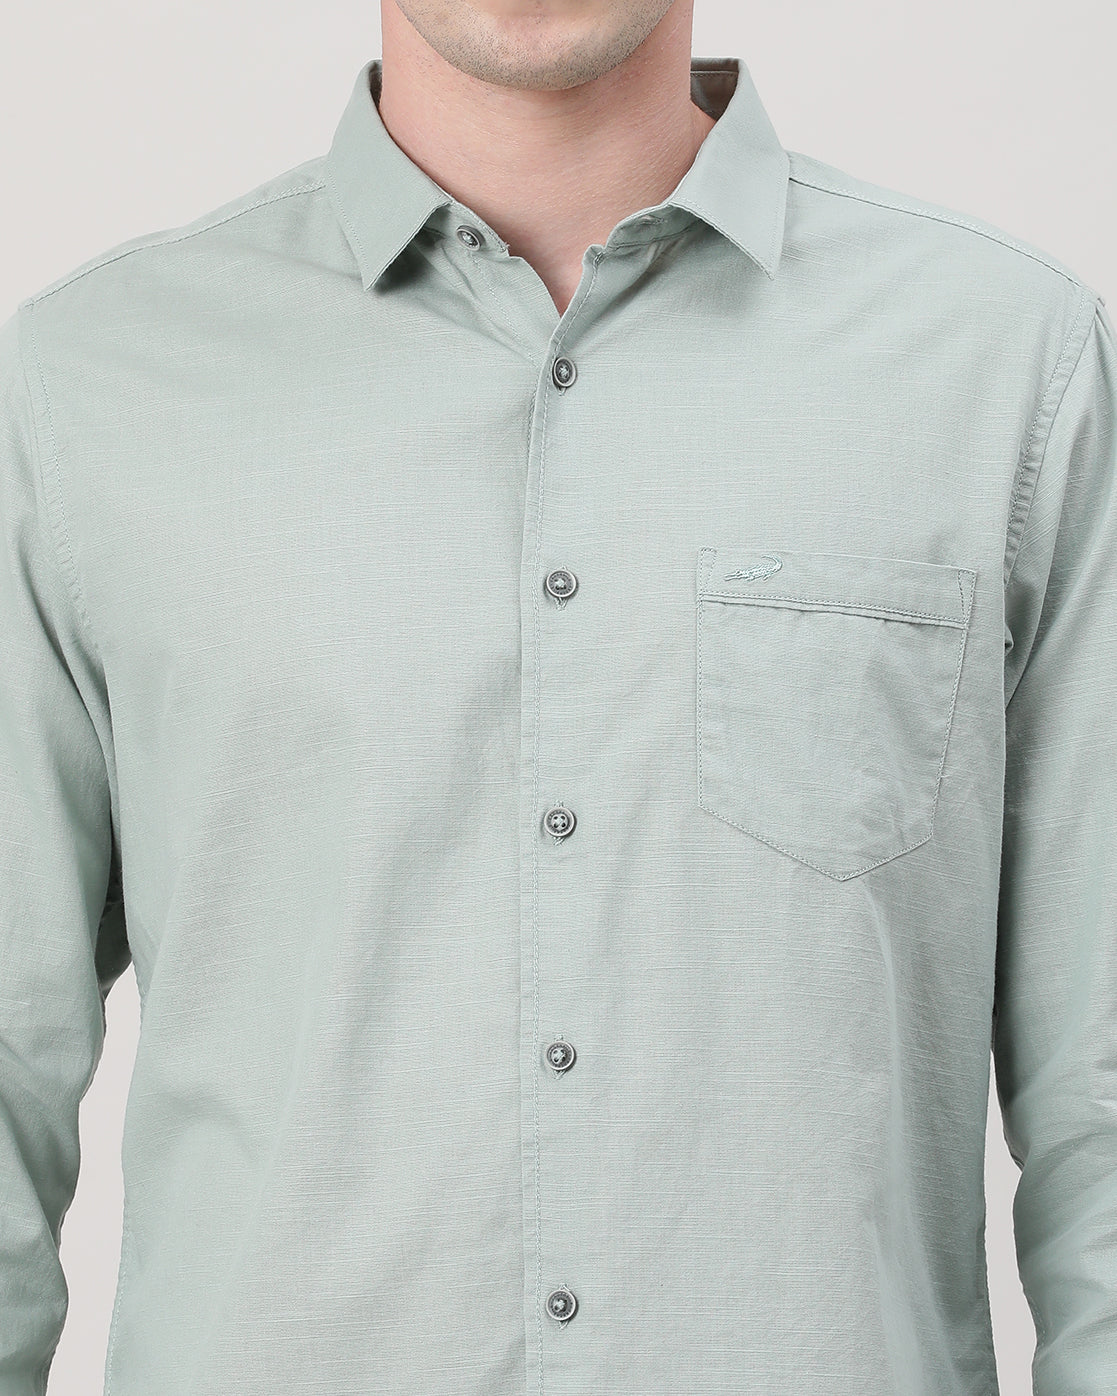 Casual Full Sleeve Comfort Fit Textured Plain Shirt Pale Aqua with Collar